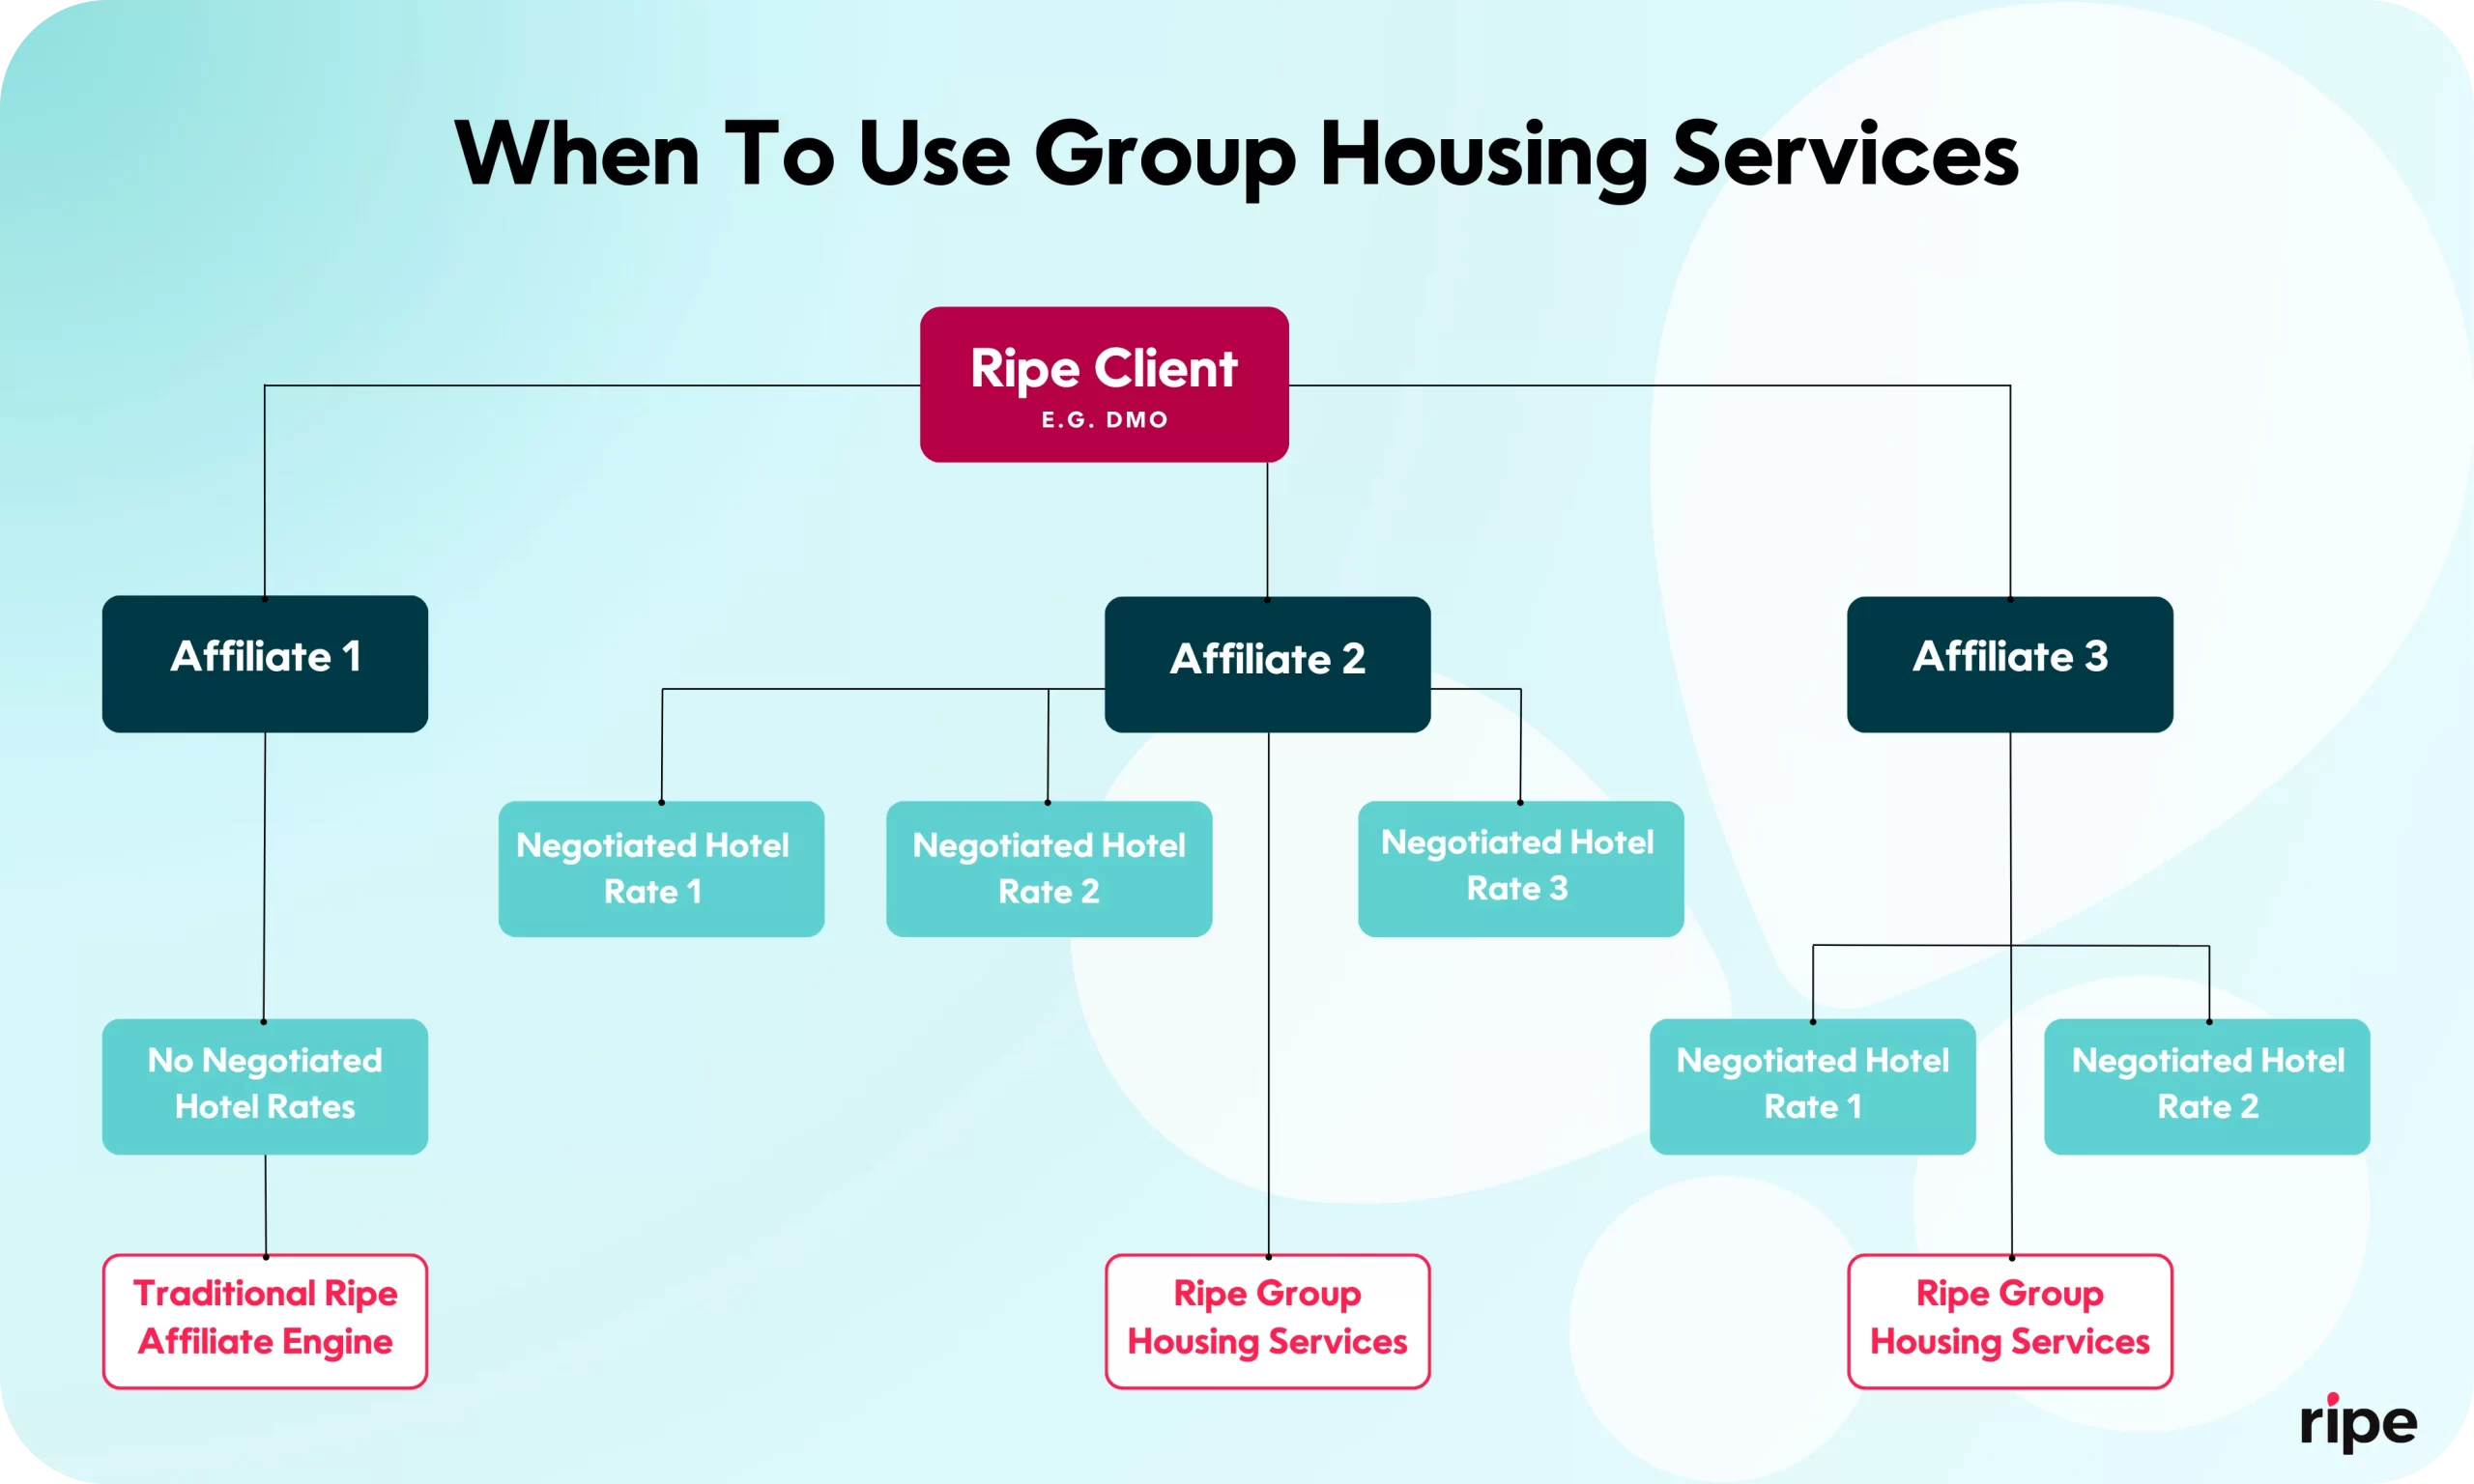 Flow chart describing when Ripe Group Housing services should be used